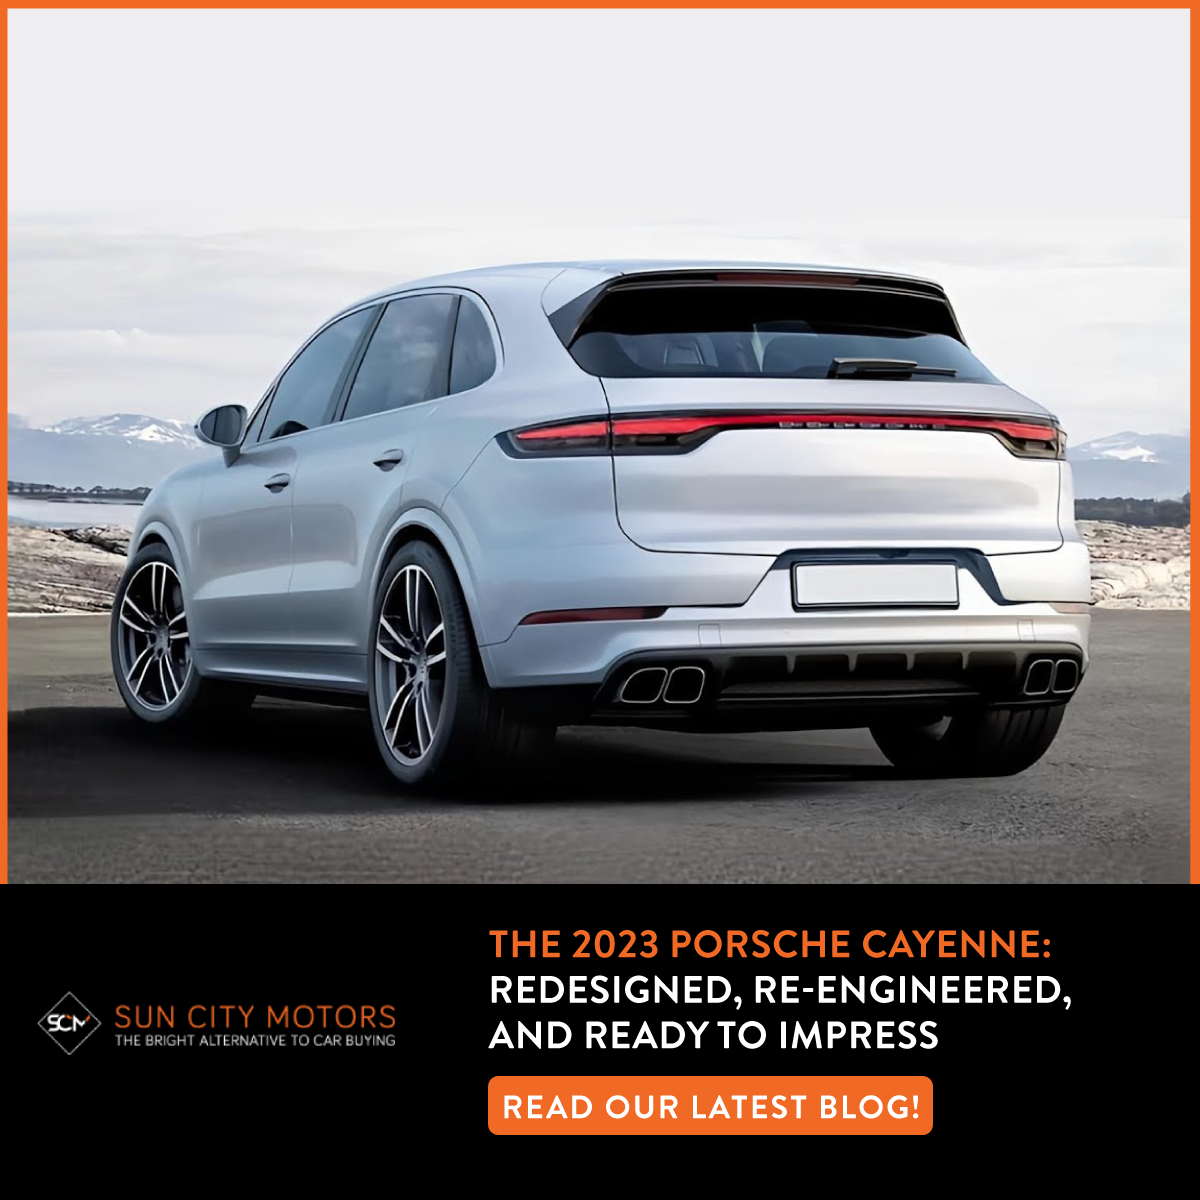 The 2023 Porsche Cayenne: Redesigned, Re-engineered, and Ready to Impress